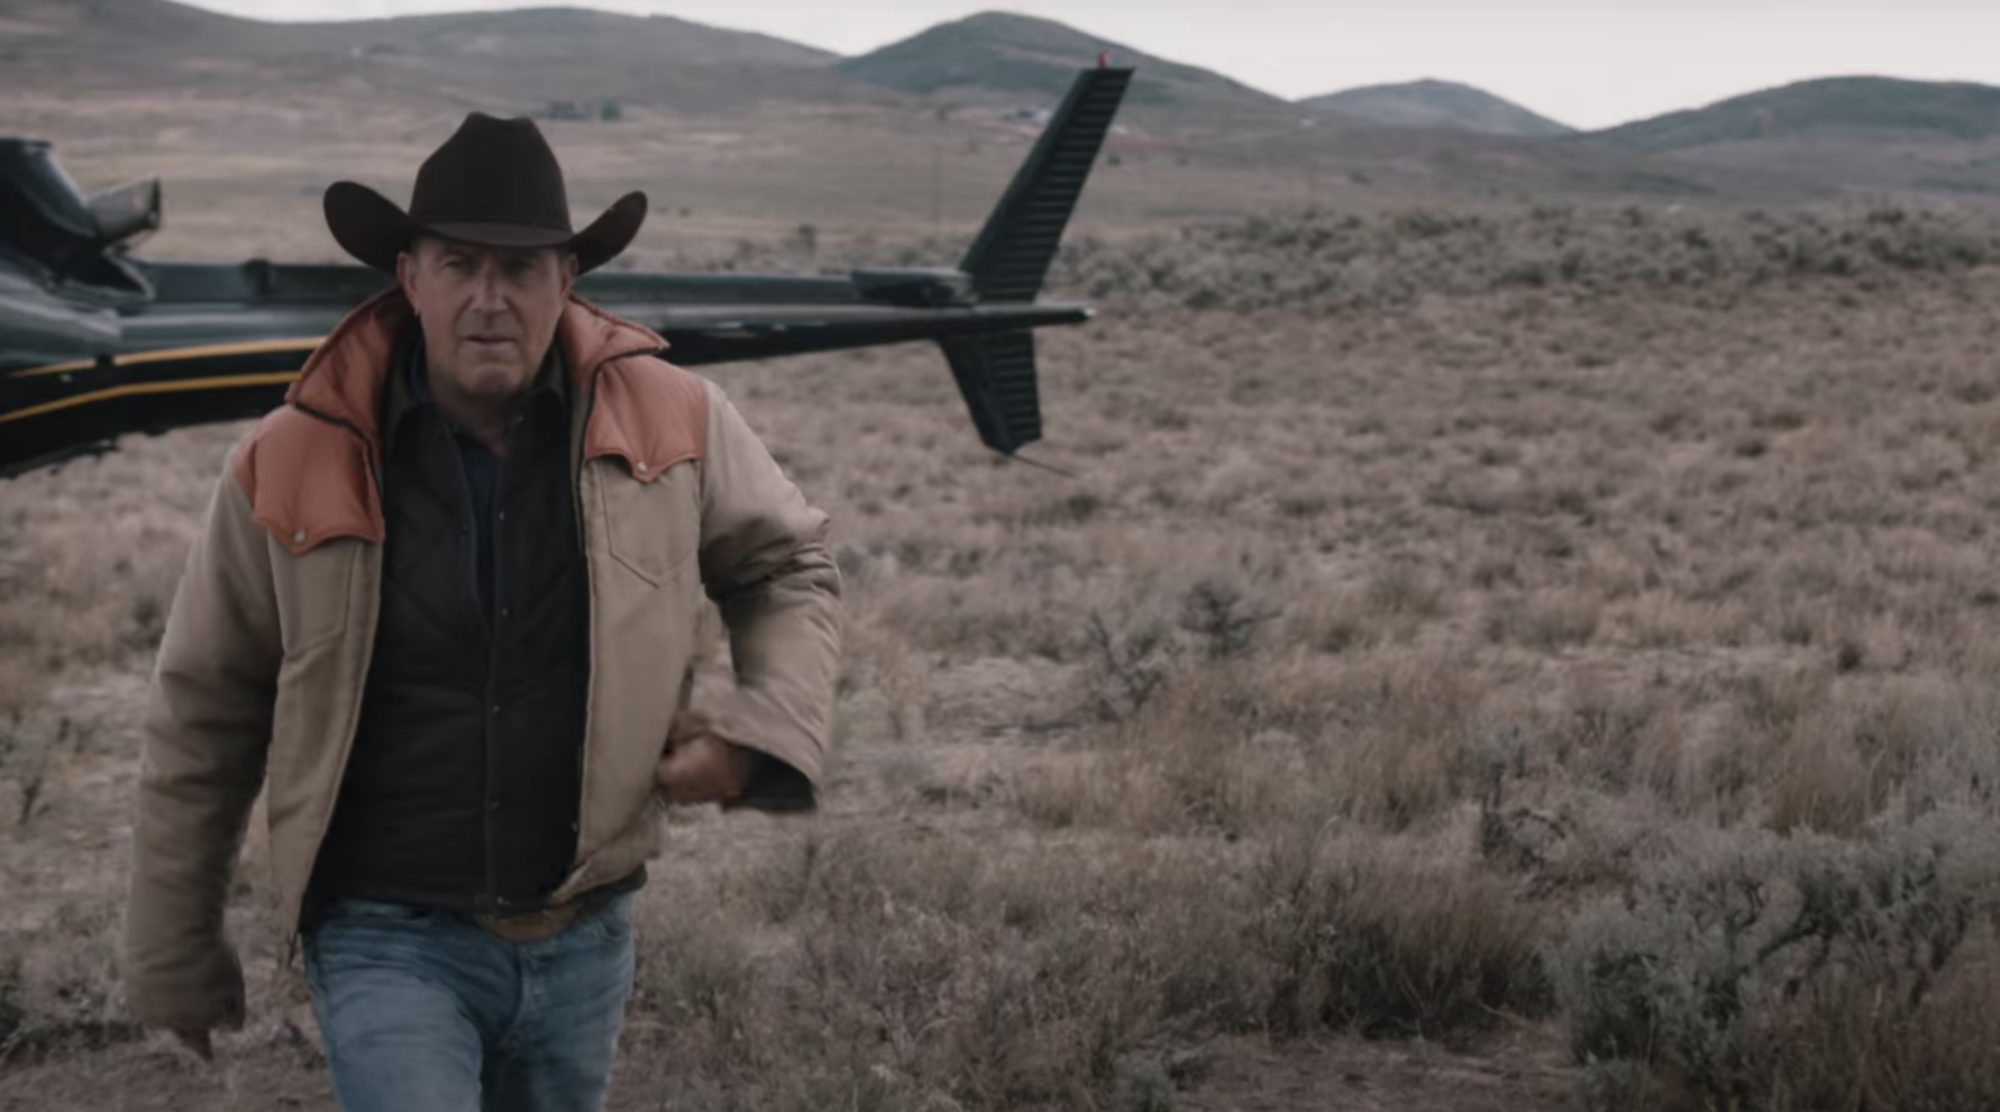 A man in a cowboy hat walks away from a helicopter.